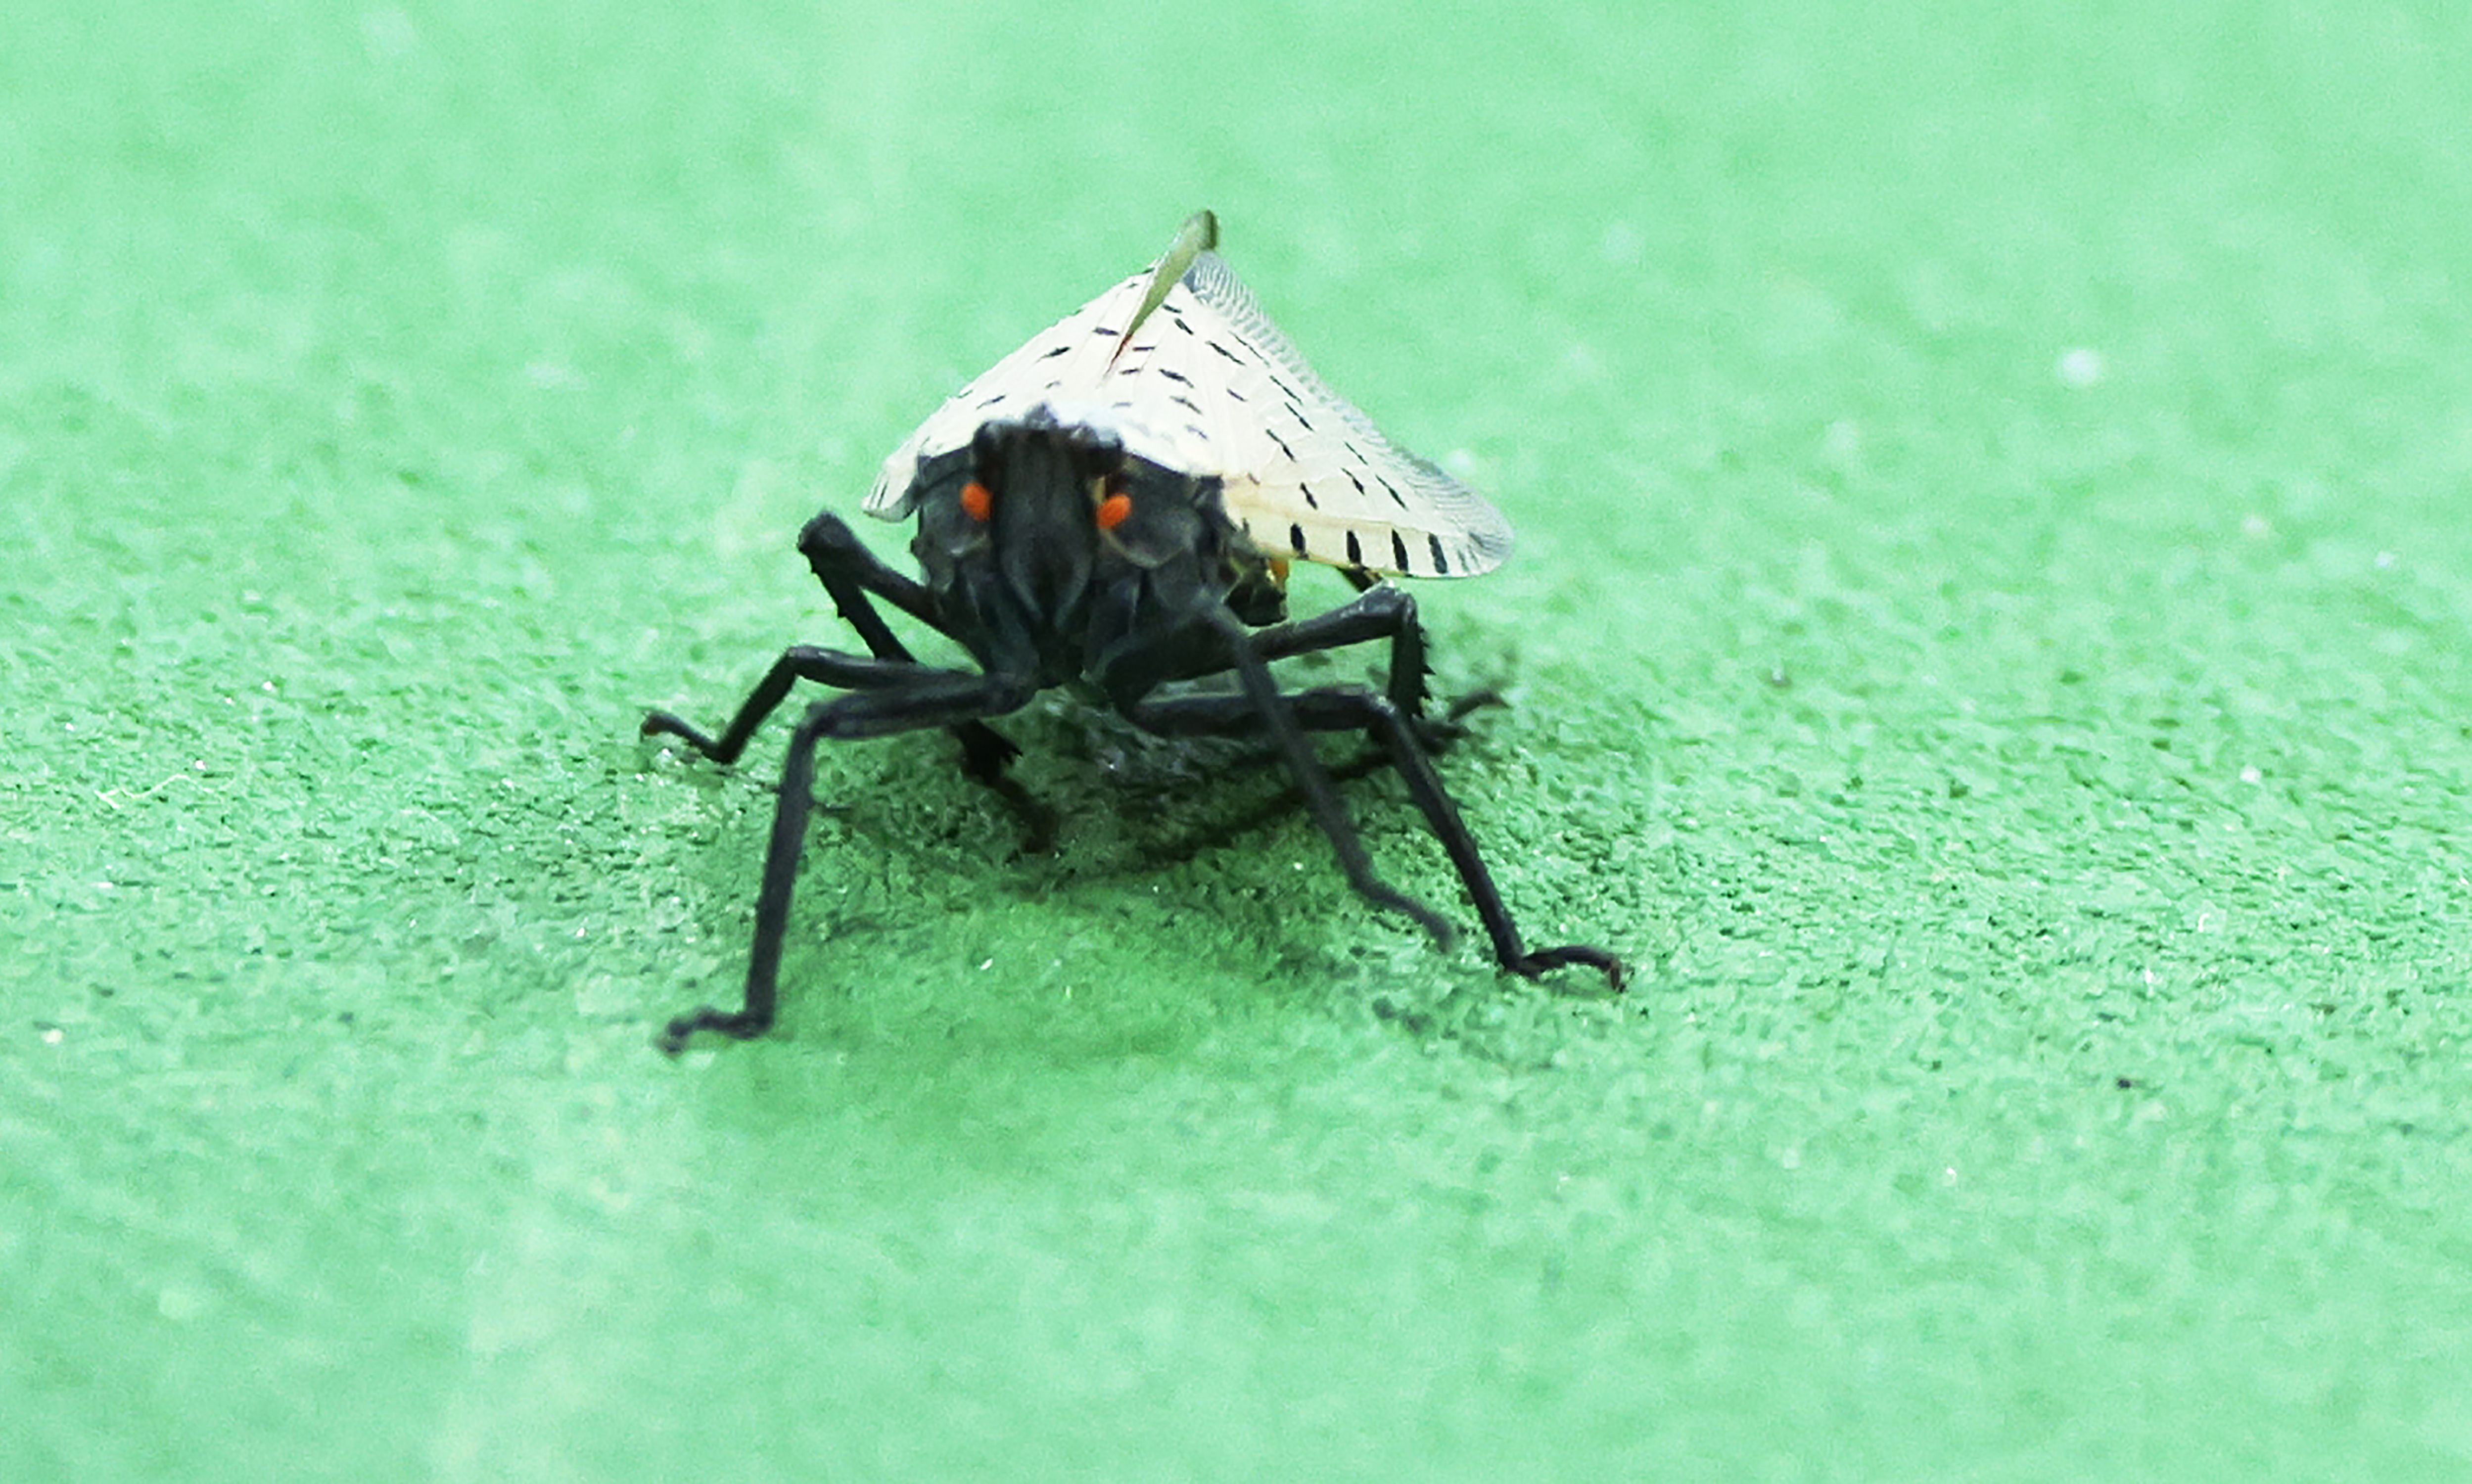 a spotted lanternfly on a tennis court